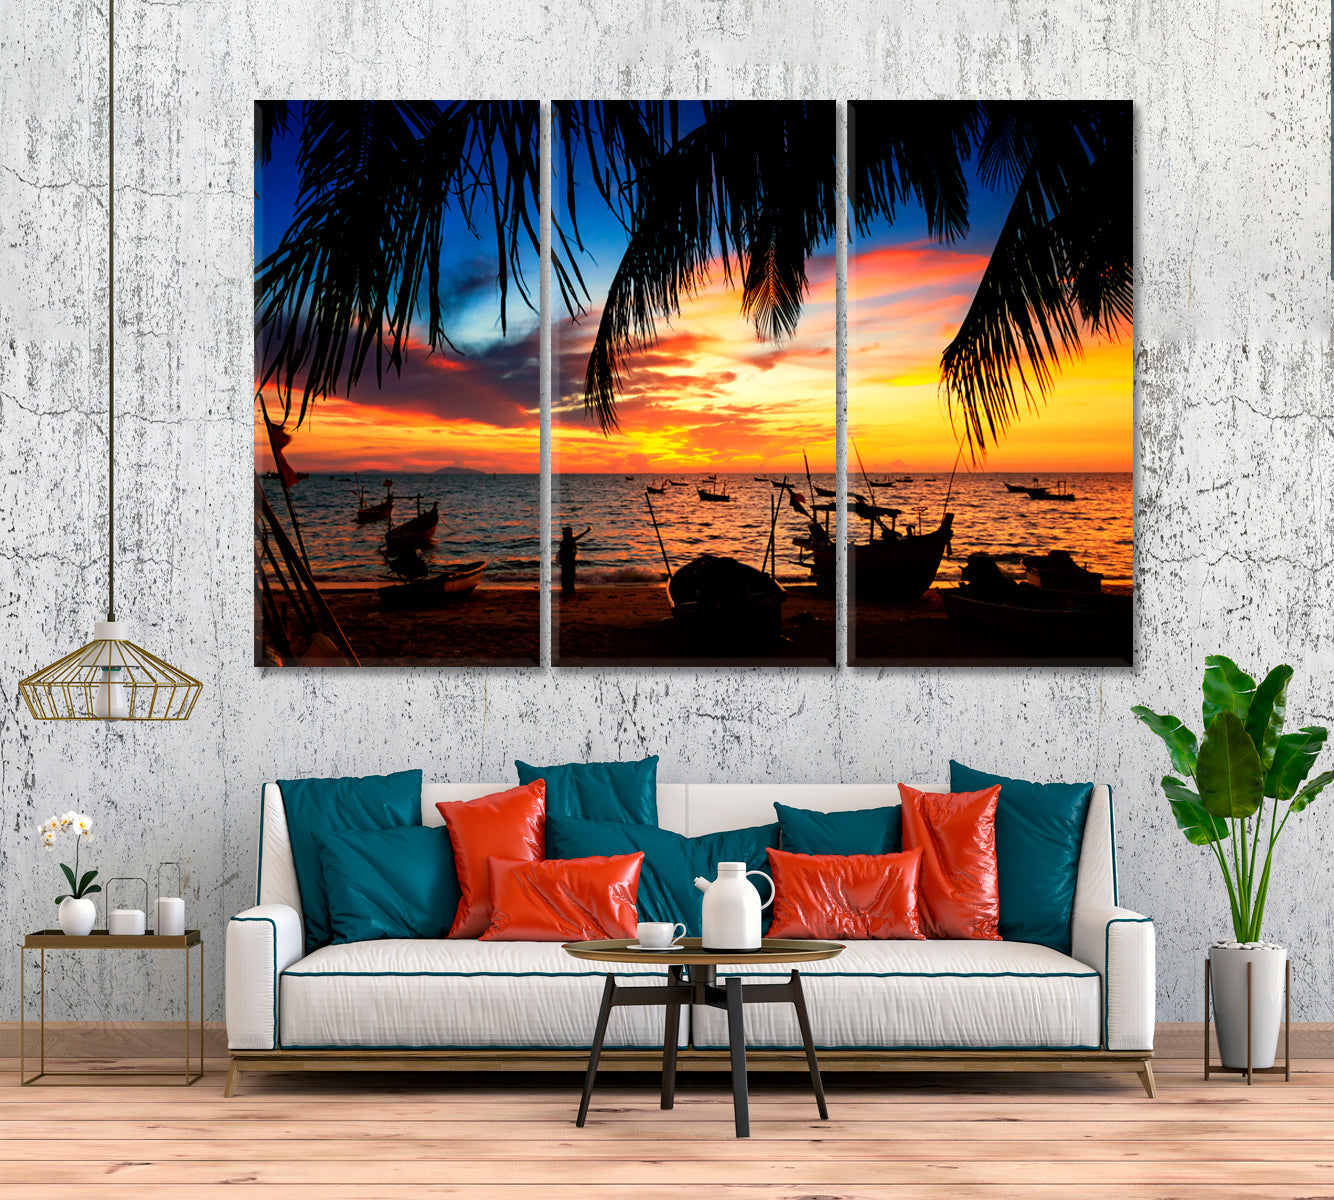 Sunset over Tropical Beach with Boats Pattaya Thailand Canvas Print ArtLexy 3 Panels 36"x24" inches 